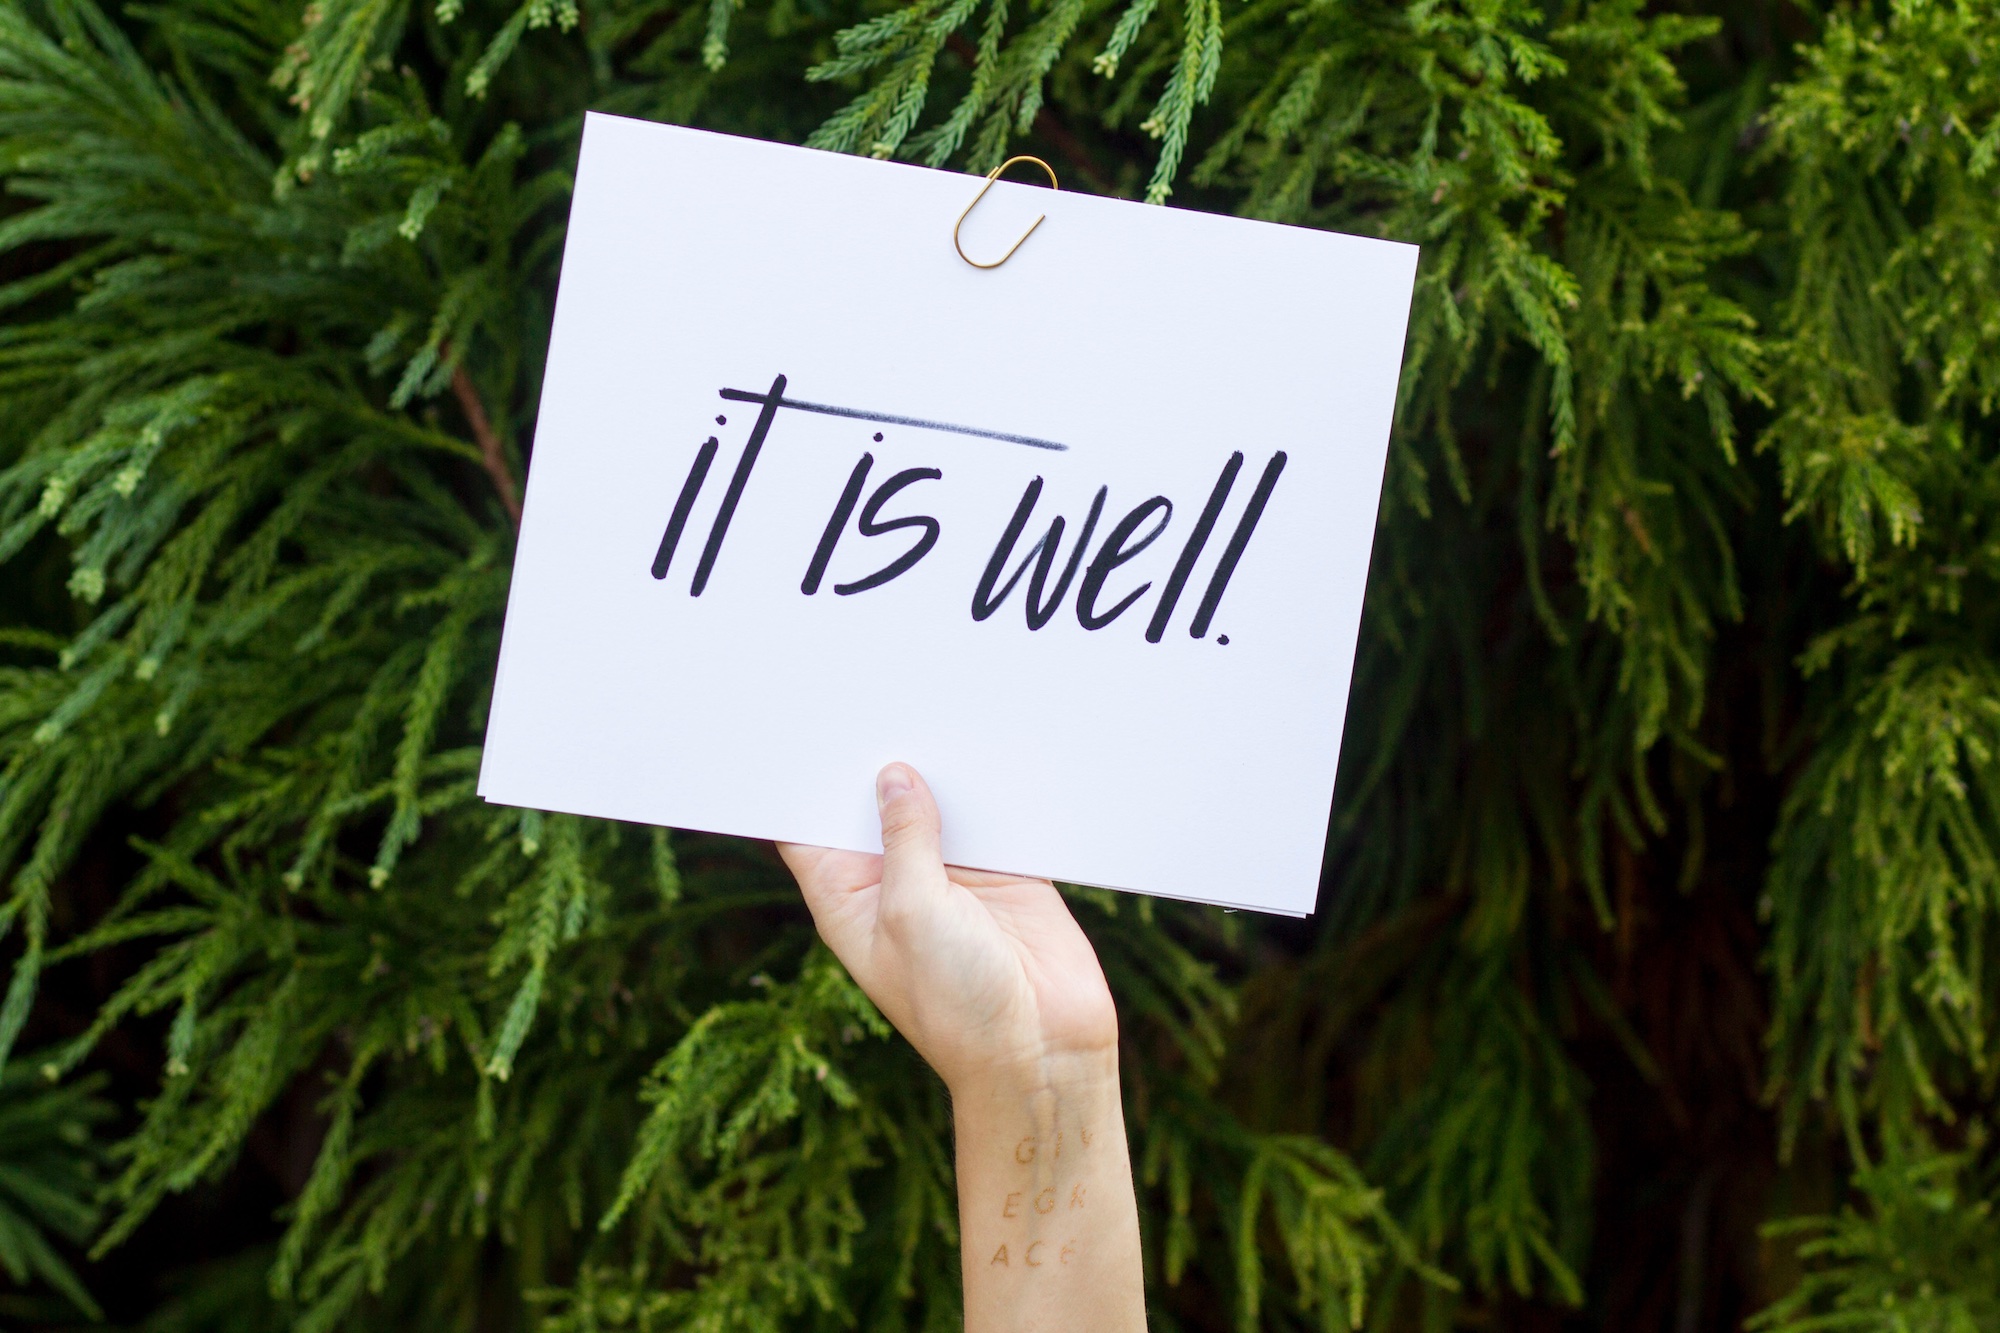 Hand holding a sign in front of a green tree that reads, "it is well."